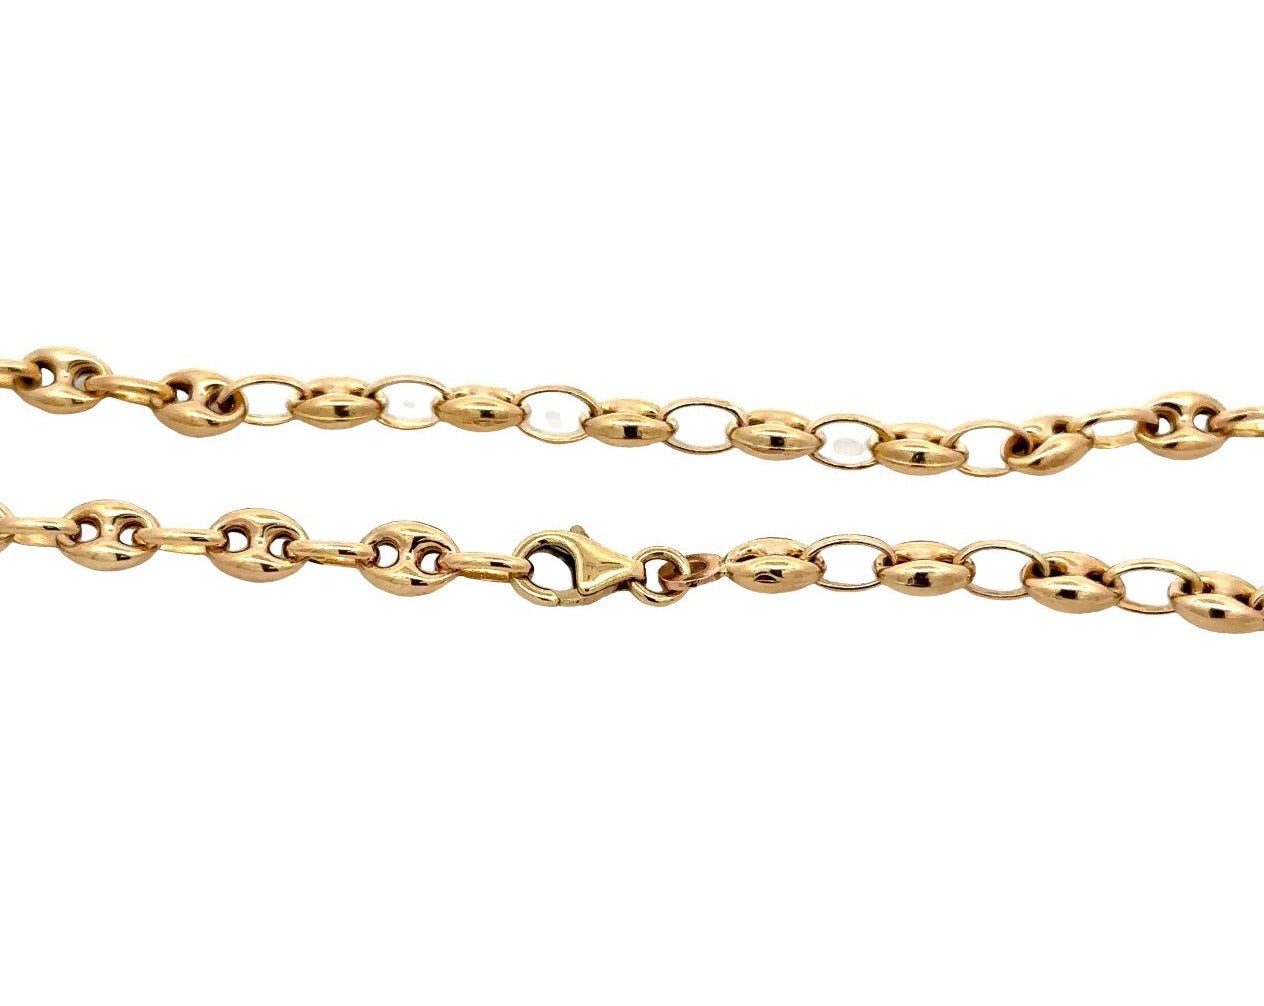 yellow gold gucci link chain close up showing lobster clasp and faint scratches